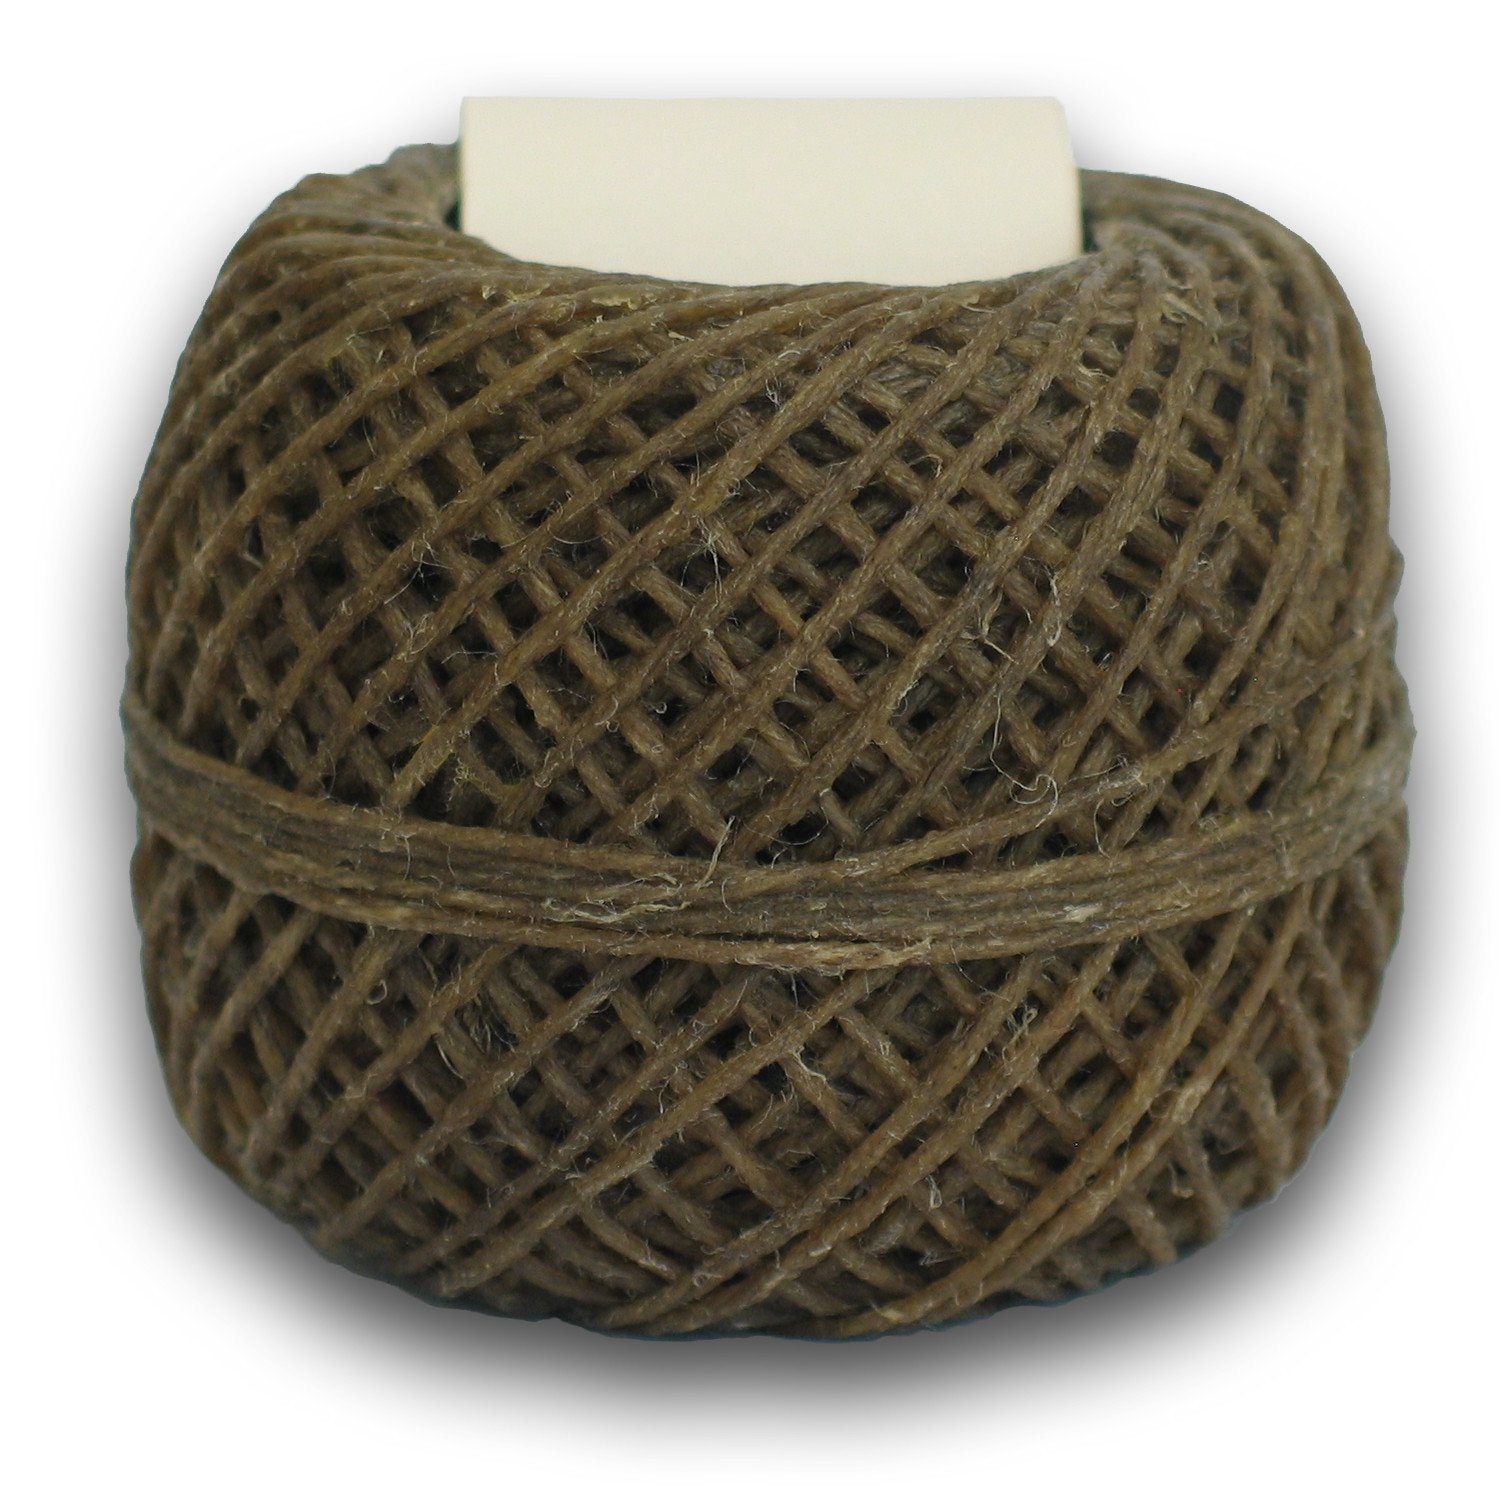 100% Organic Hemp Wick with Natural Beeswax Coating, Twisted Bee (200ft x Standard Size)